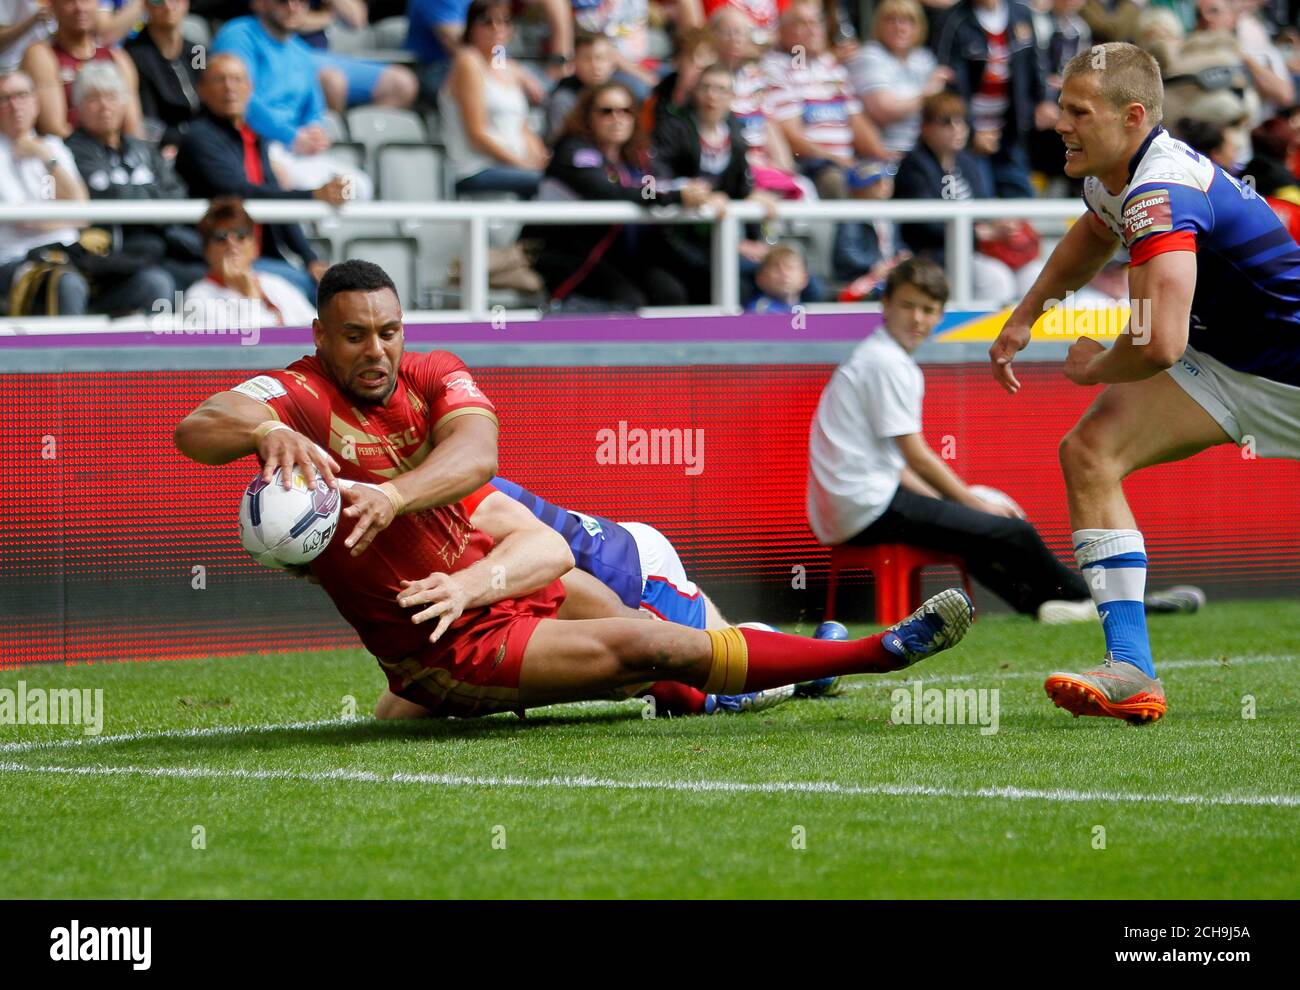 Catalan Dragons Jodie Broughton scores his 2nd try during the Dacia Magic Weekend match at St James' Park, Newcastle. Stock Photo